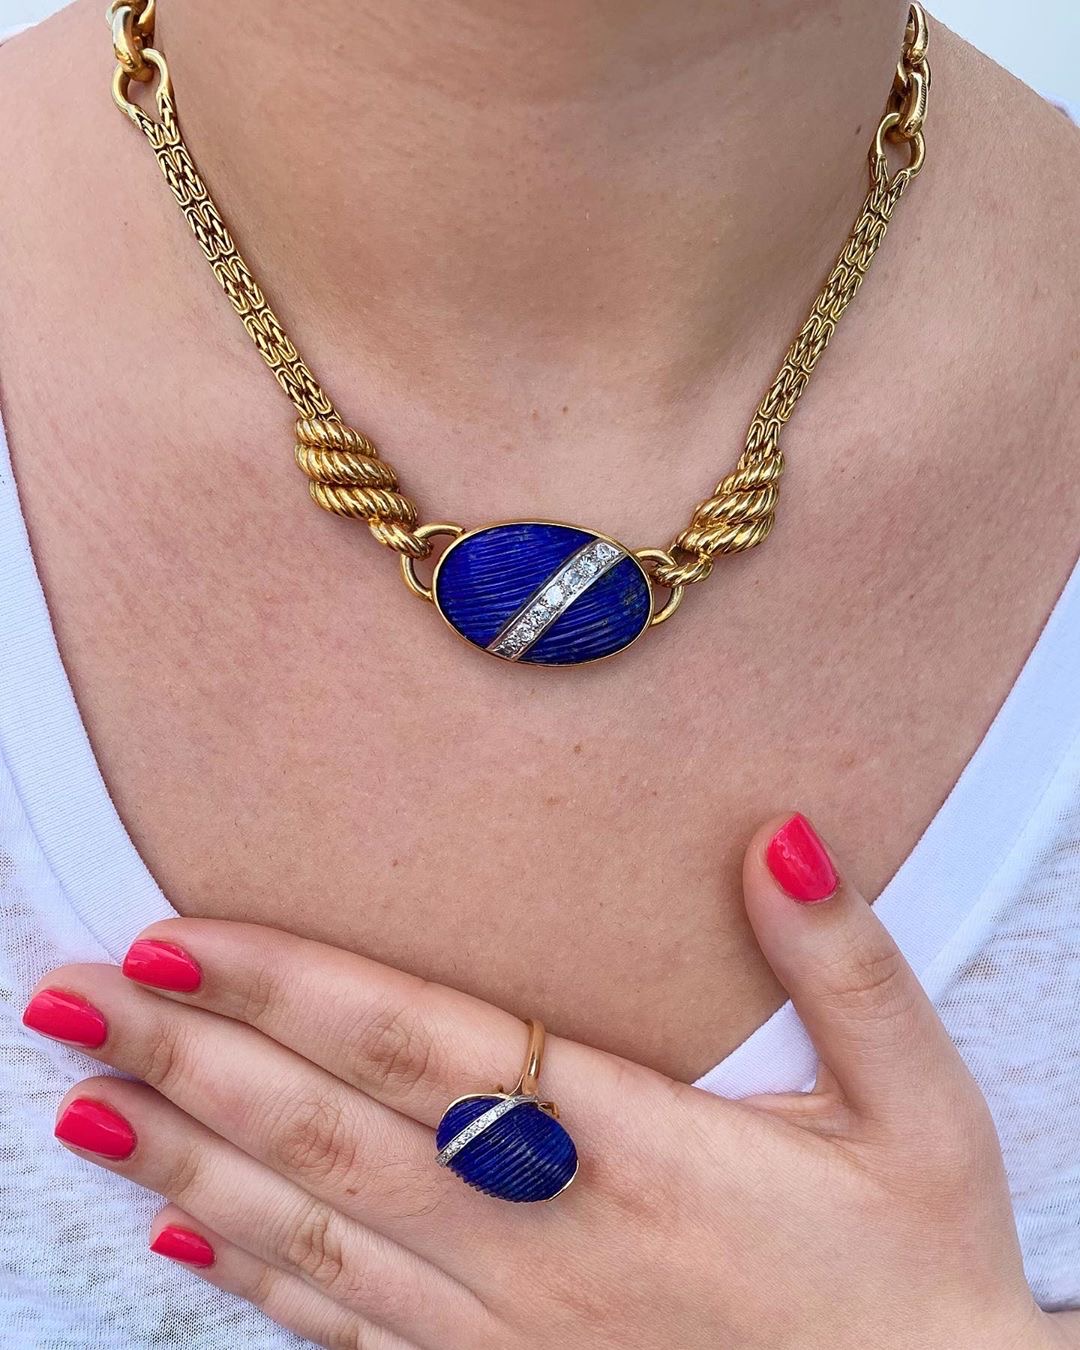 Lapis Lazul necklaces and ring - at Bella Antiques at The MAAC